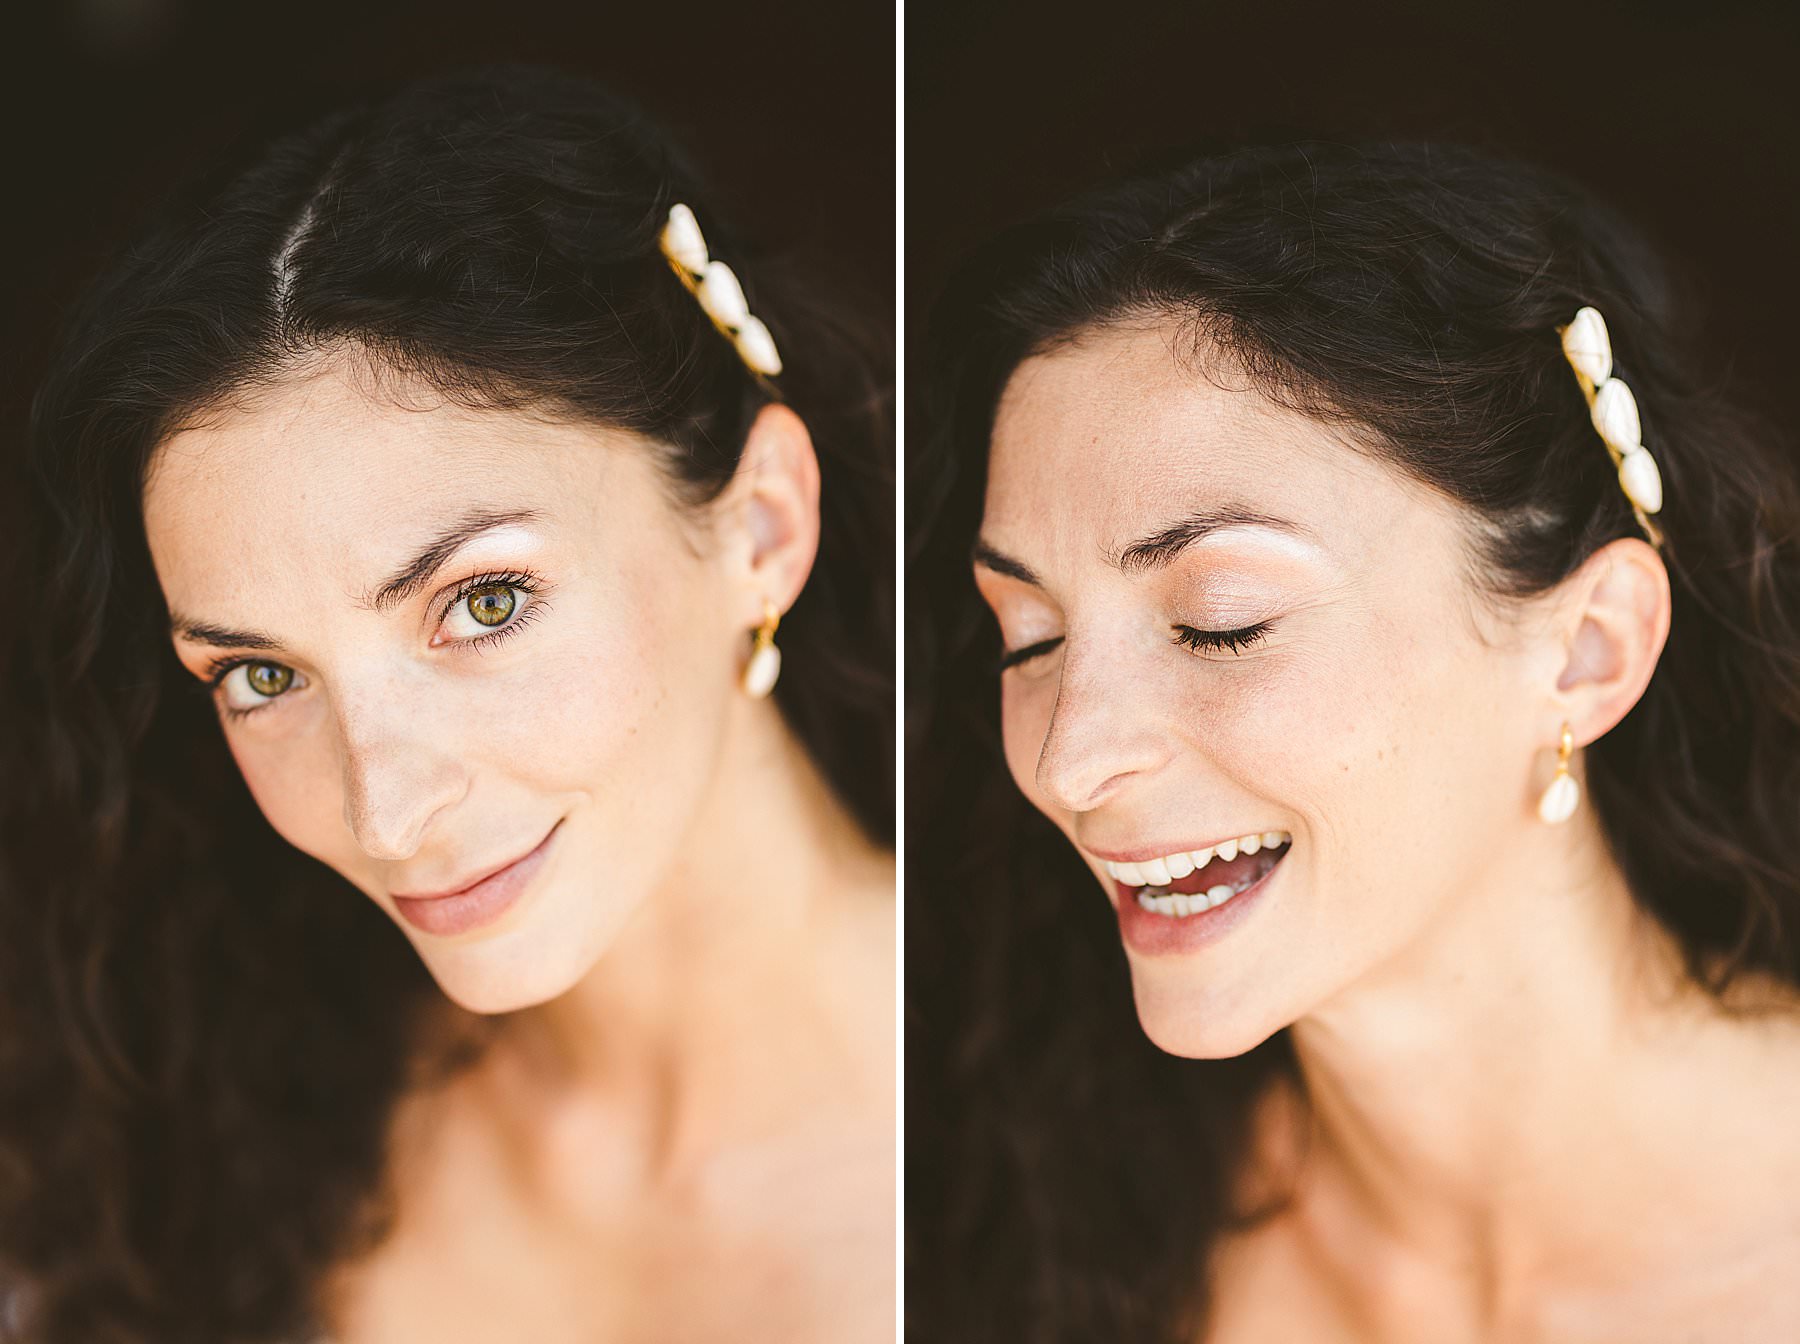 Beautiful and spontaneous bride portrait took at the intimate destination wedding at La Valle farmhouse in Montaione